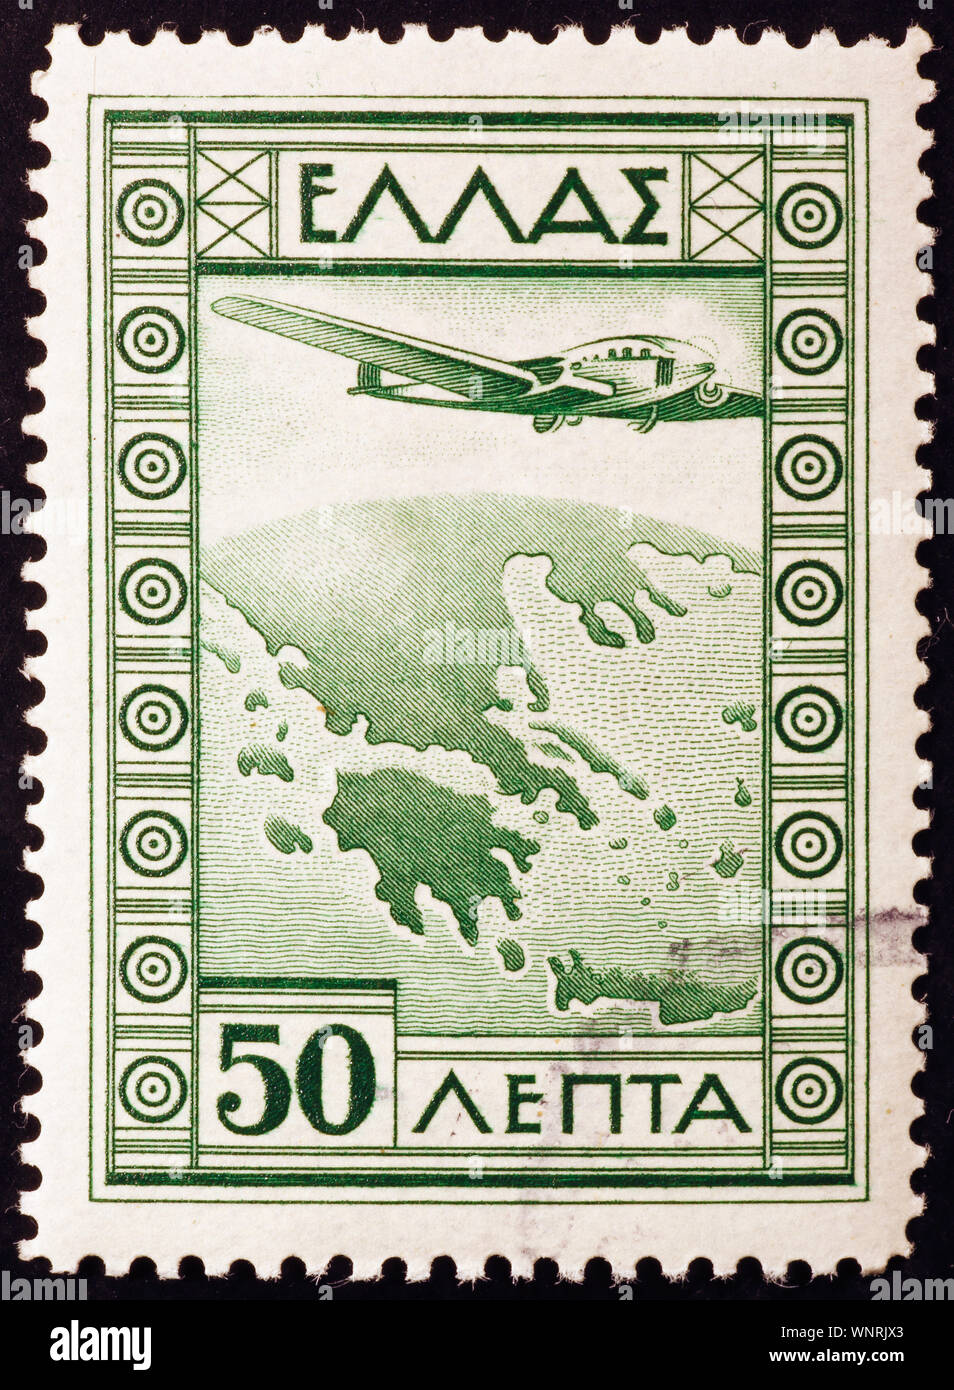 Airplane overflying Greece on vintage postage stamp Stock Photo